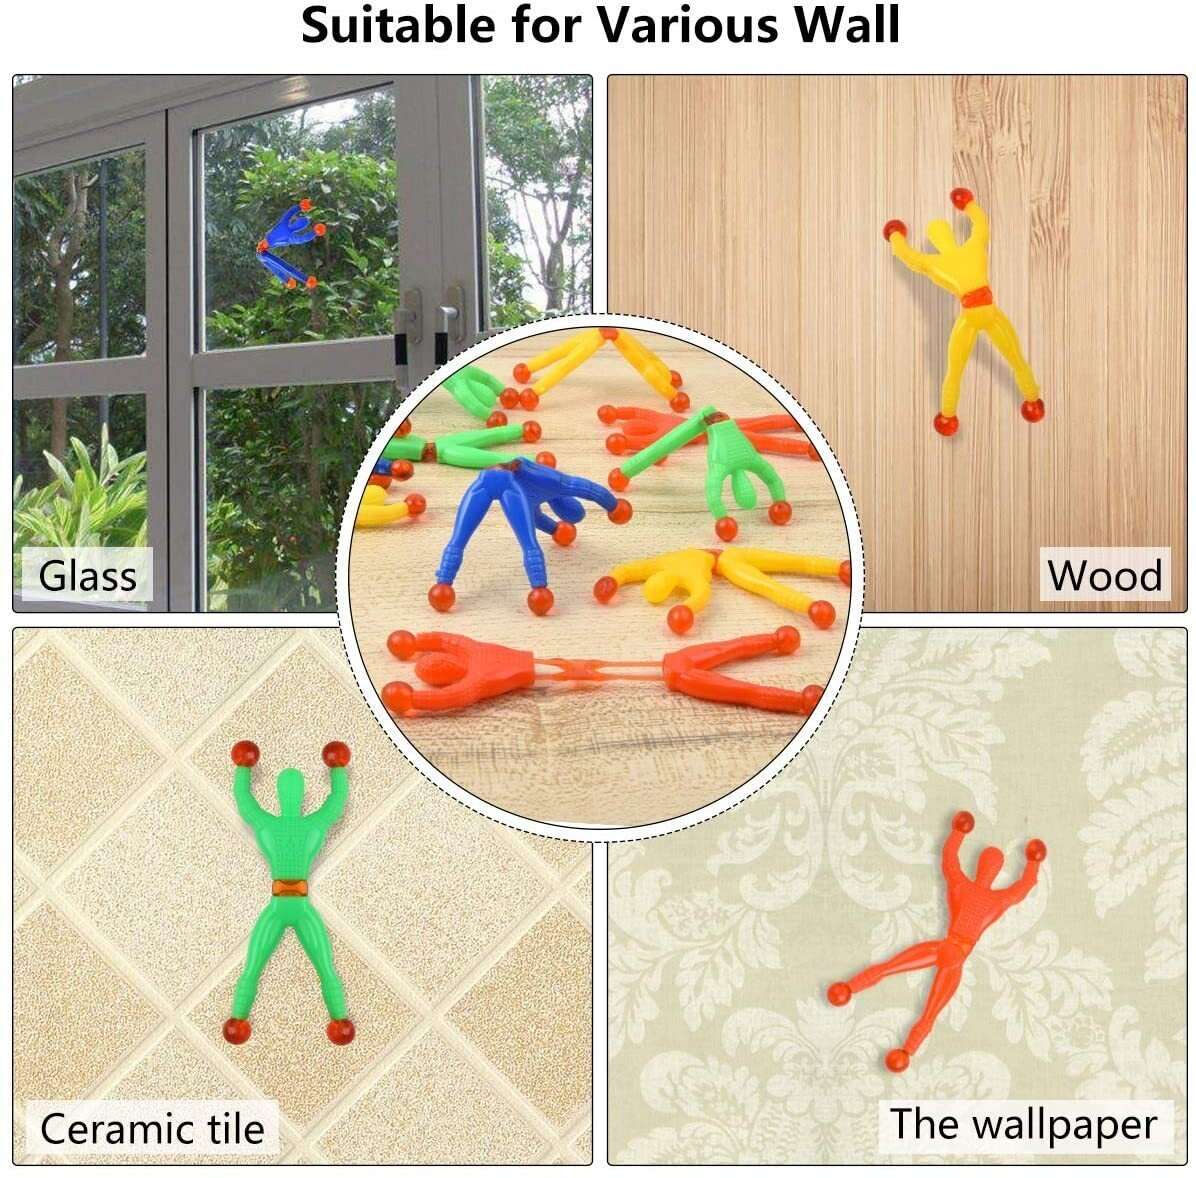 Early Christmas Hot Sale - WALL CLIMBING TOY (10PCS)BUY 2 GET 1 FREE NOW